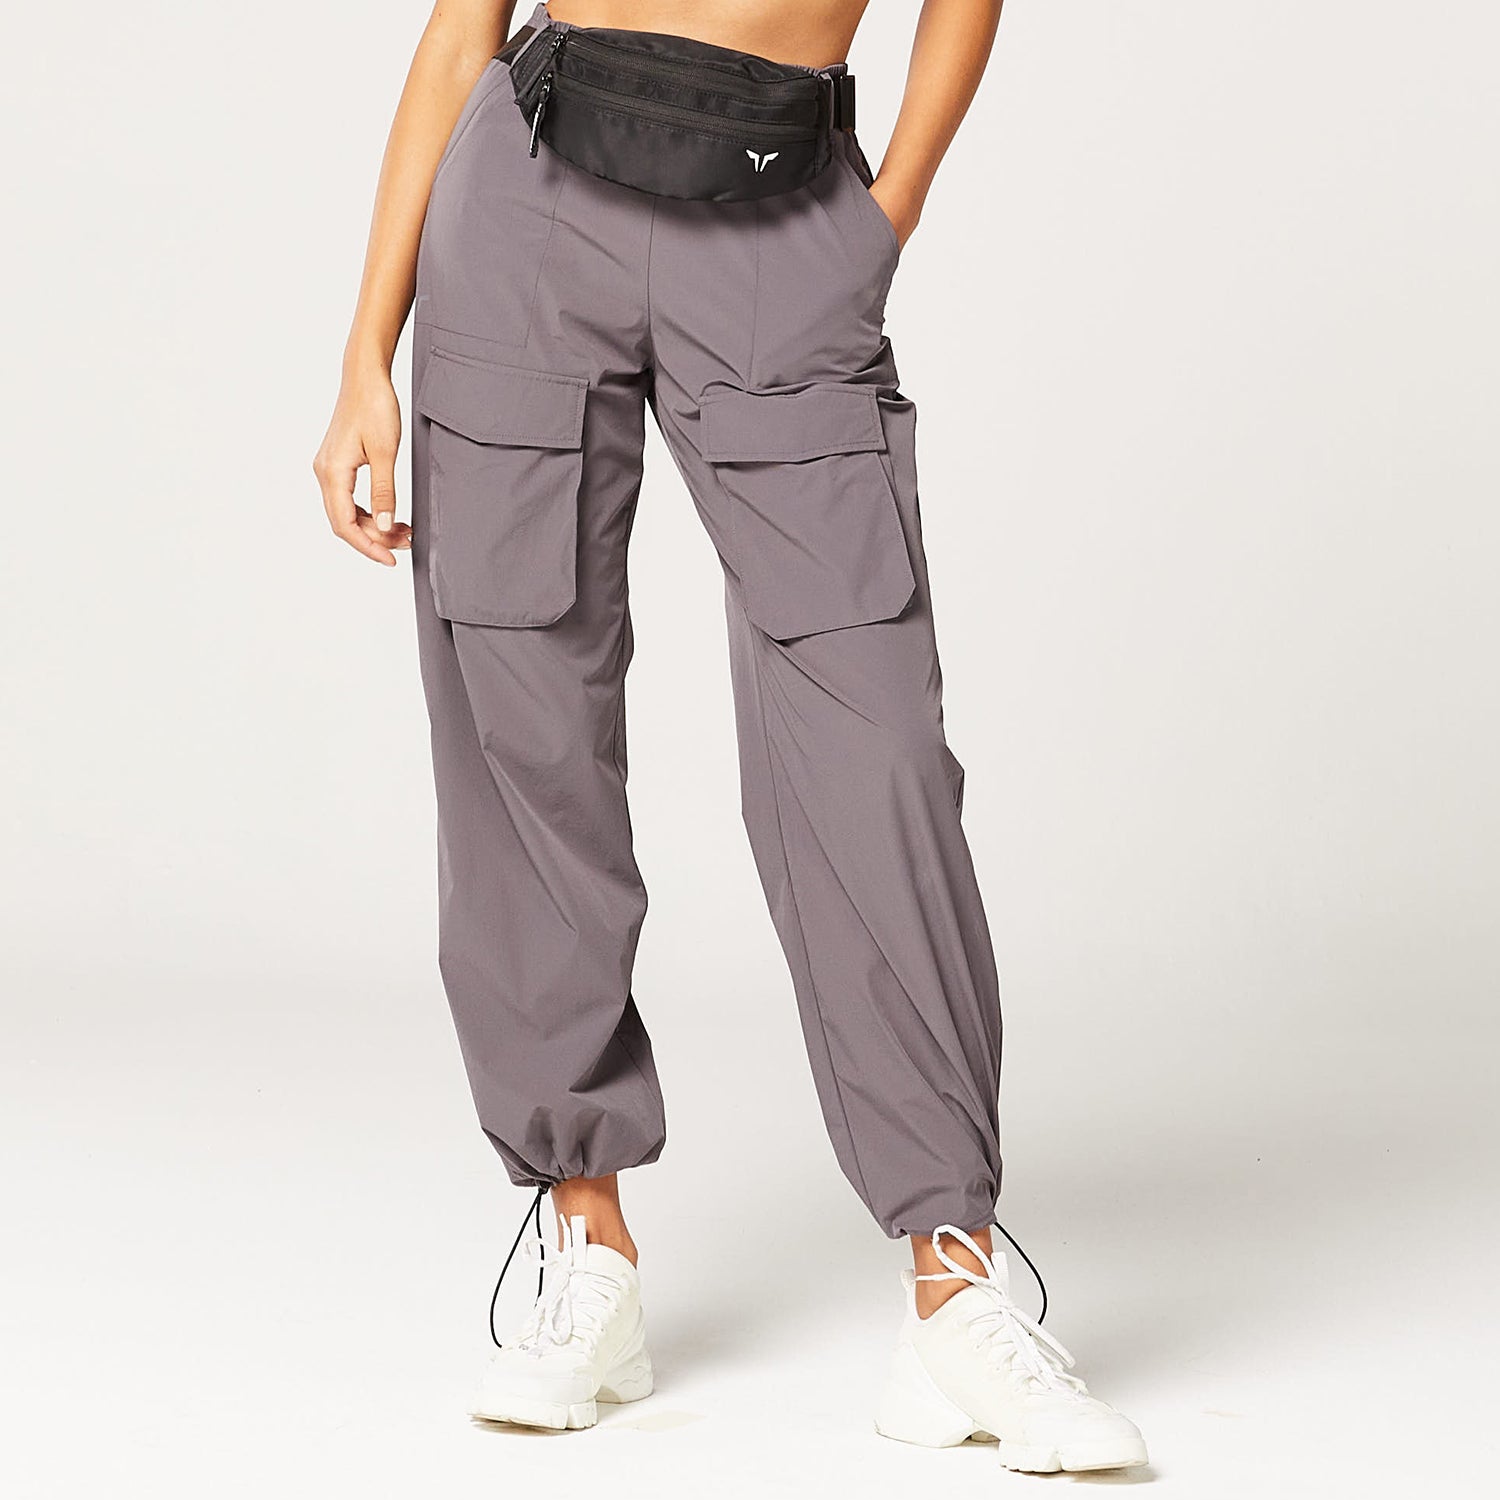 squatwolf-workout-clothes-code-cargo-pants-charcoal-gym-pants-for-women